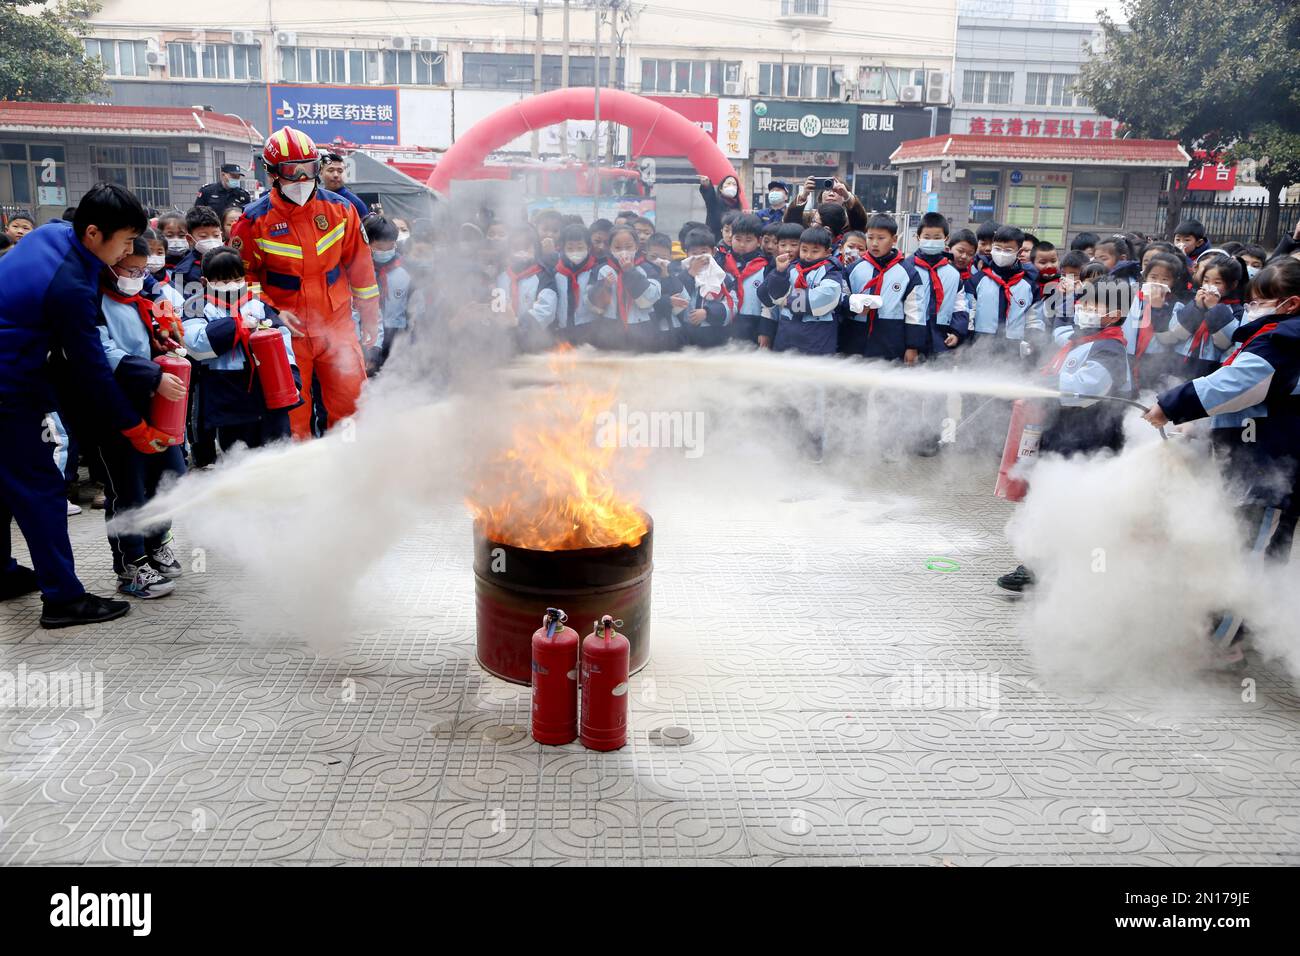 LIANYUNGANG, CHINA - FEBRUARY 6, 2023 - Fire rescue workers teach students how to use fire extinguishers in Lianyungang city, East China's Jiangsu pro Stock Photo